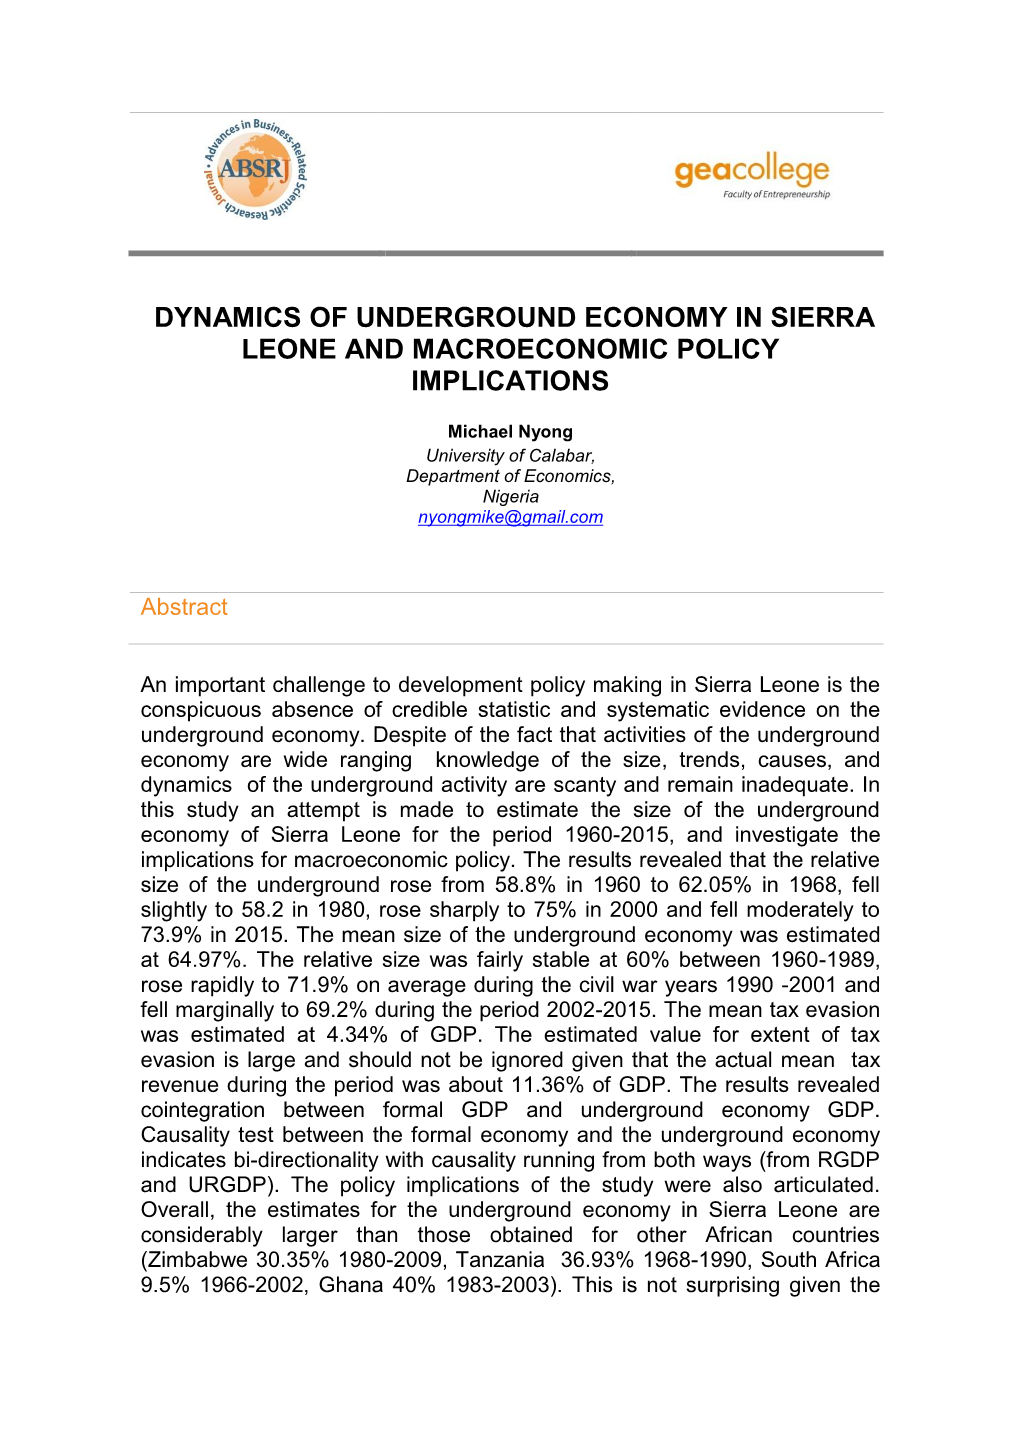 Dynamics of Underground Economy in Sierra Leone and Macroeconomic Policy Implications